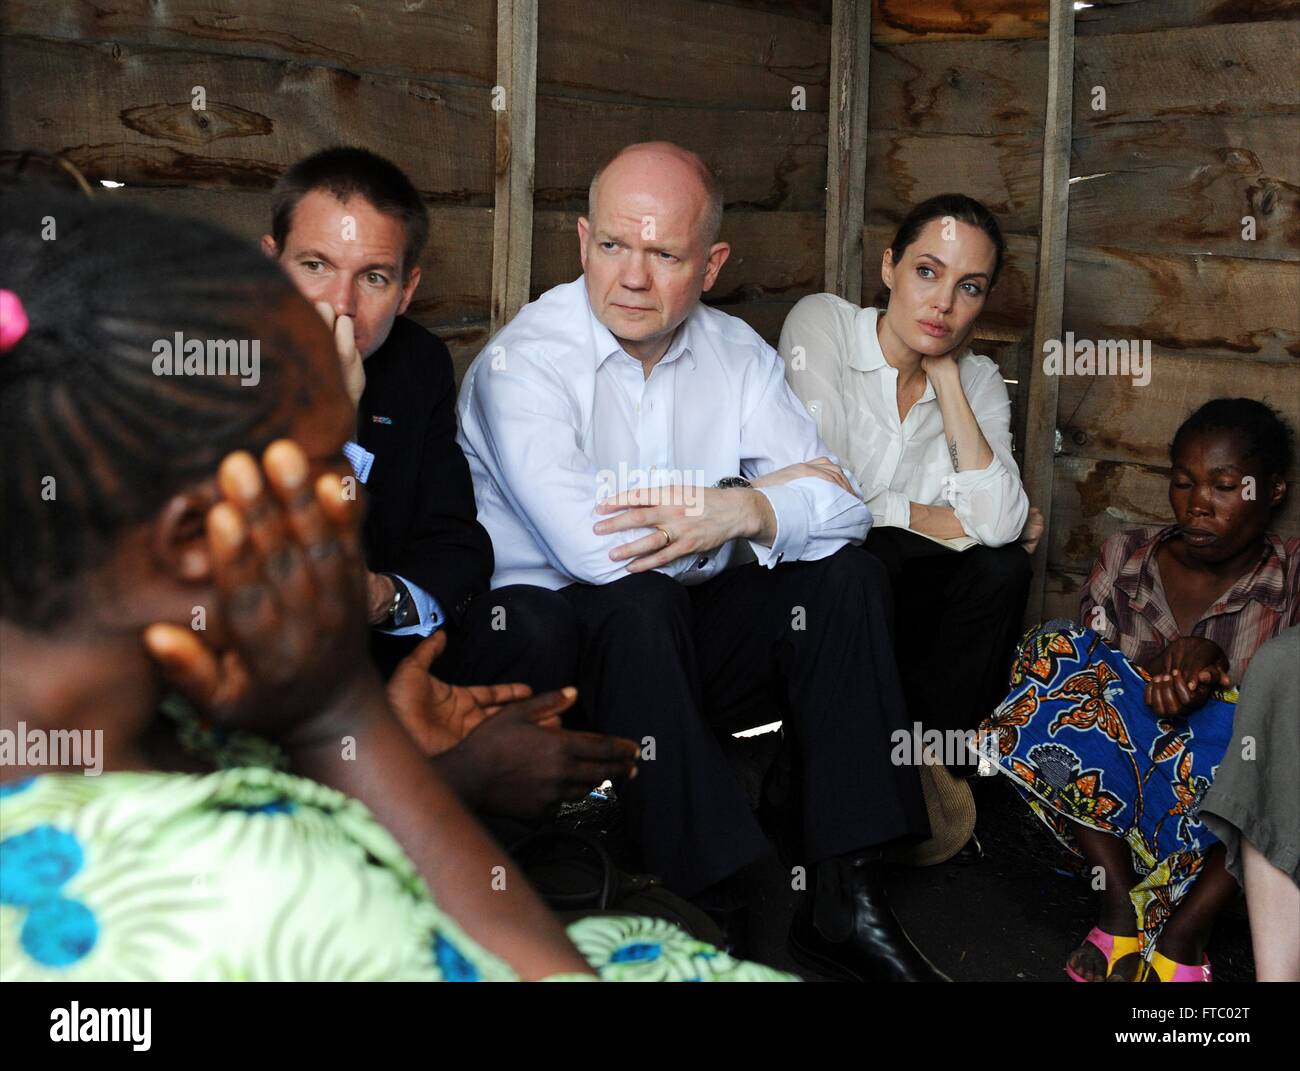 Former United Kingdom Foreign Secretary William Hague and actress and U.N Special Envoy Angelina Jolie Pitt visit the visit Nzolo refugee camp March 24, 2013 in Goma, Democratic Republic of Congo. Stock Photo